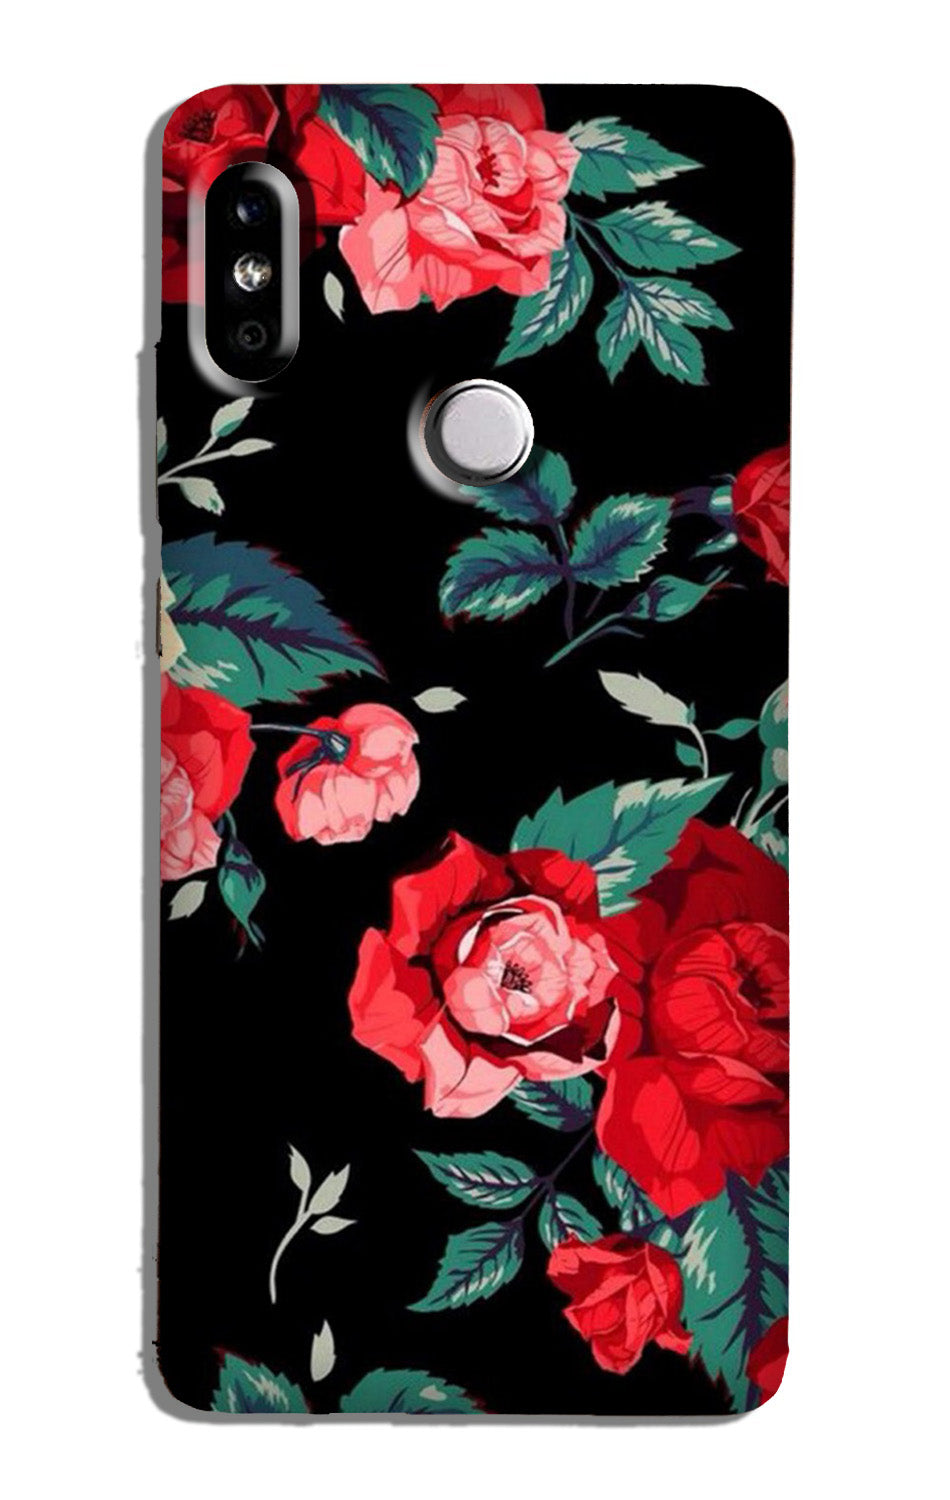 Red Rose2 Case for Redmi Note 6 Pro